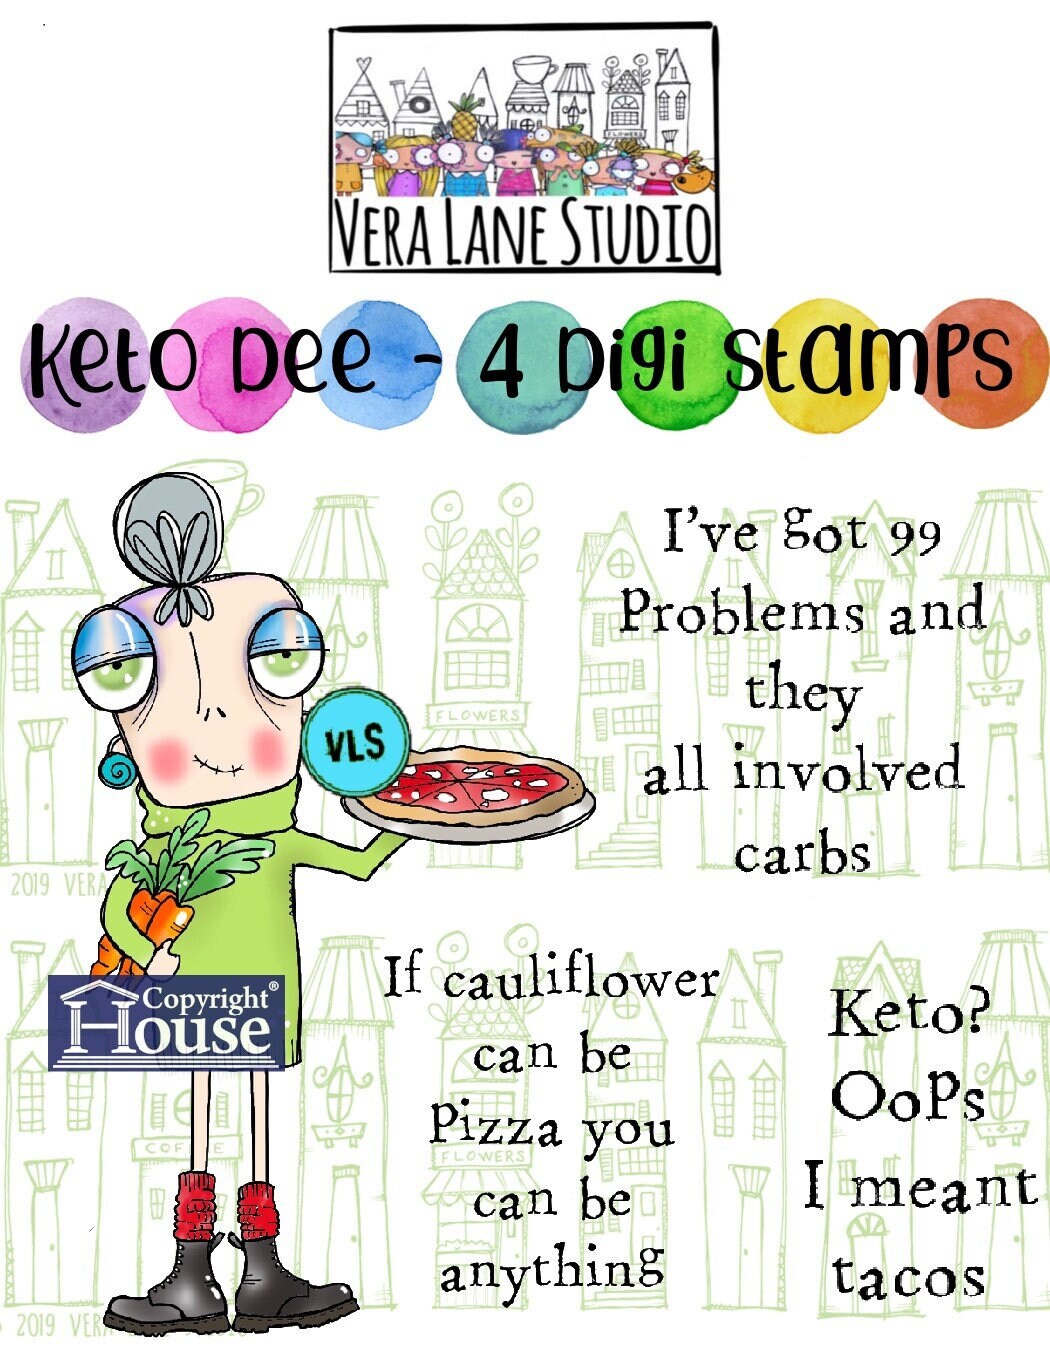 Keto Dee - 4 Digi stamps in jpg and png files